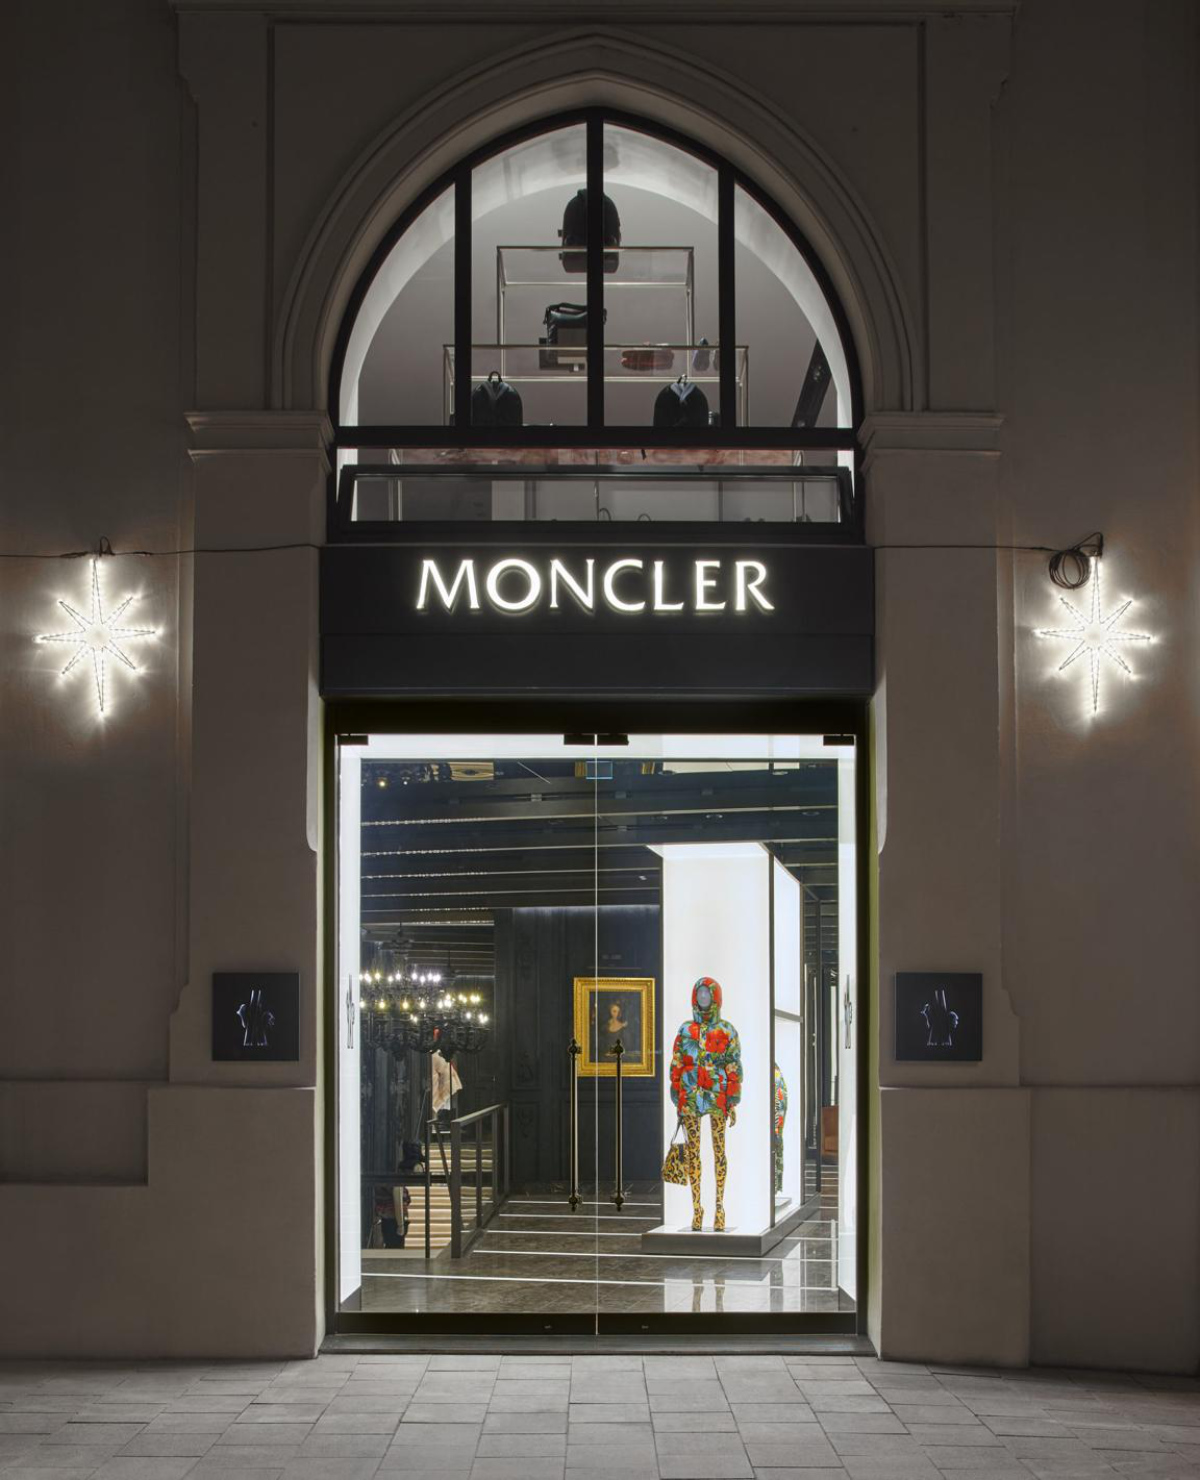 New Moncler flagship store in Munich